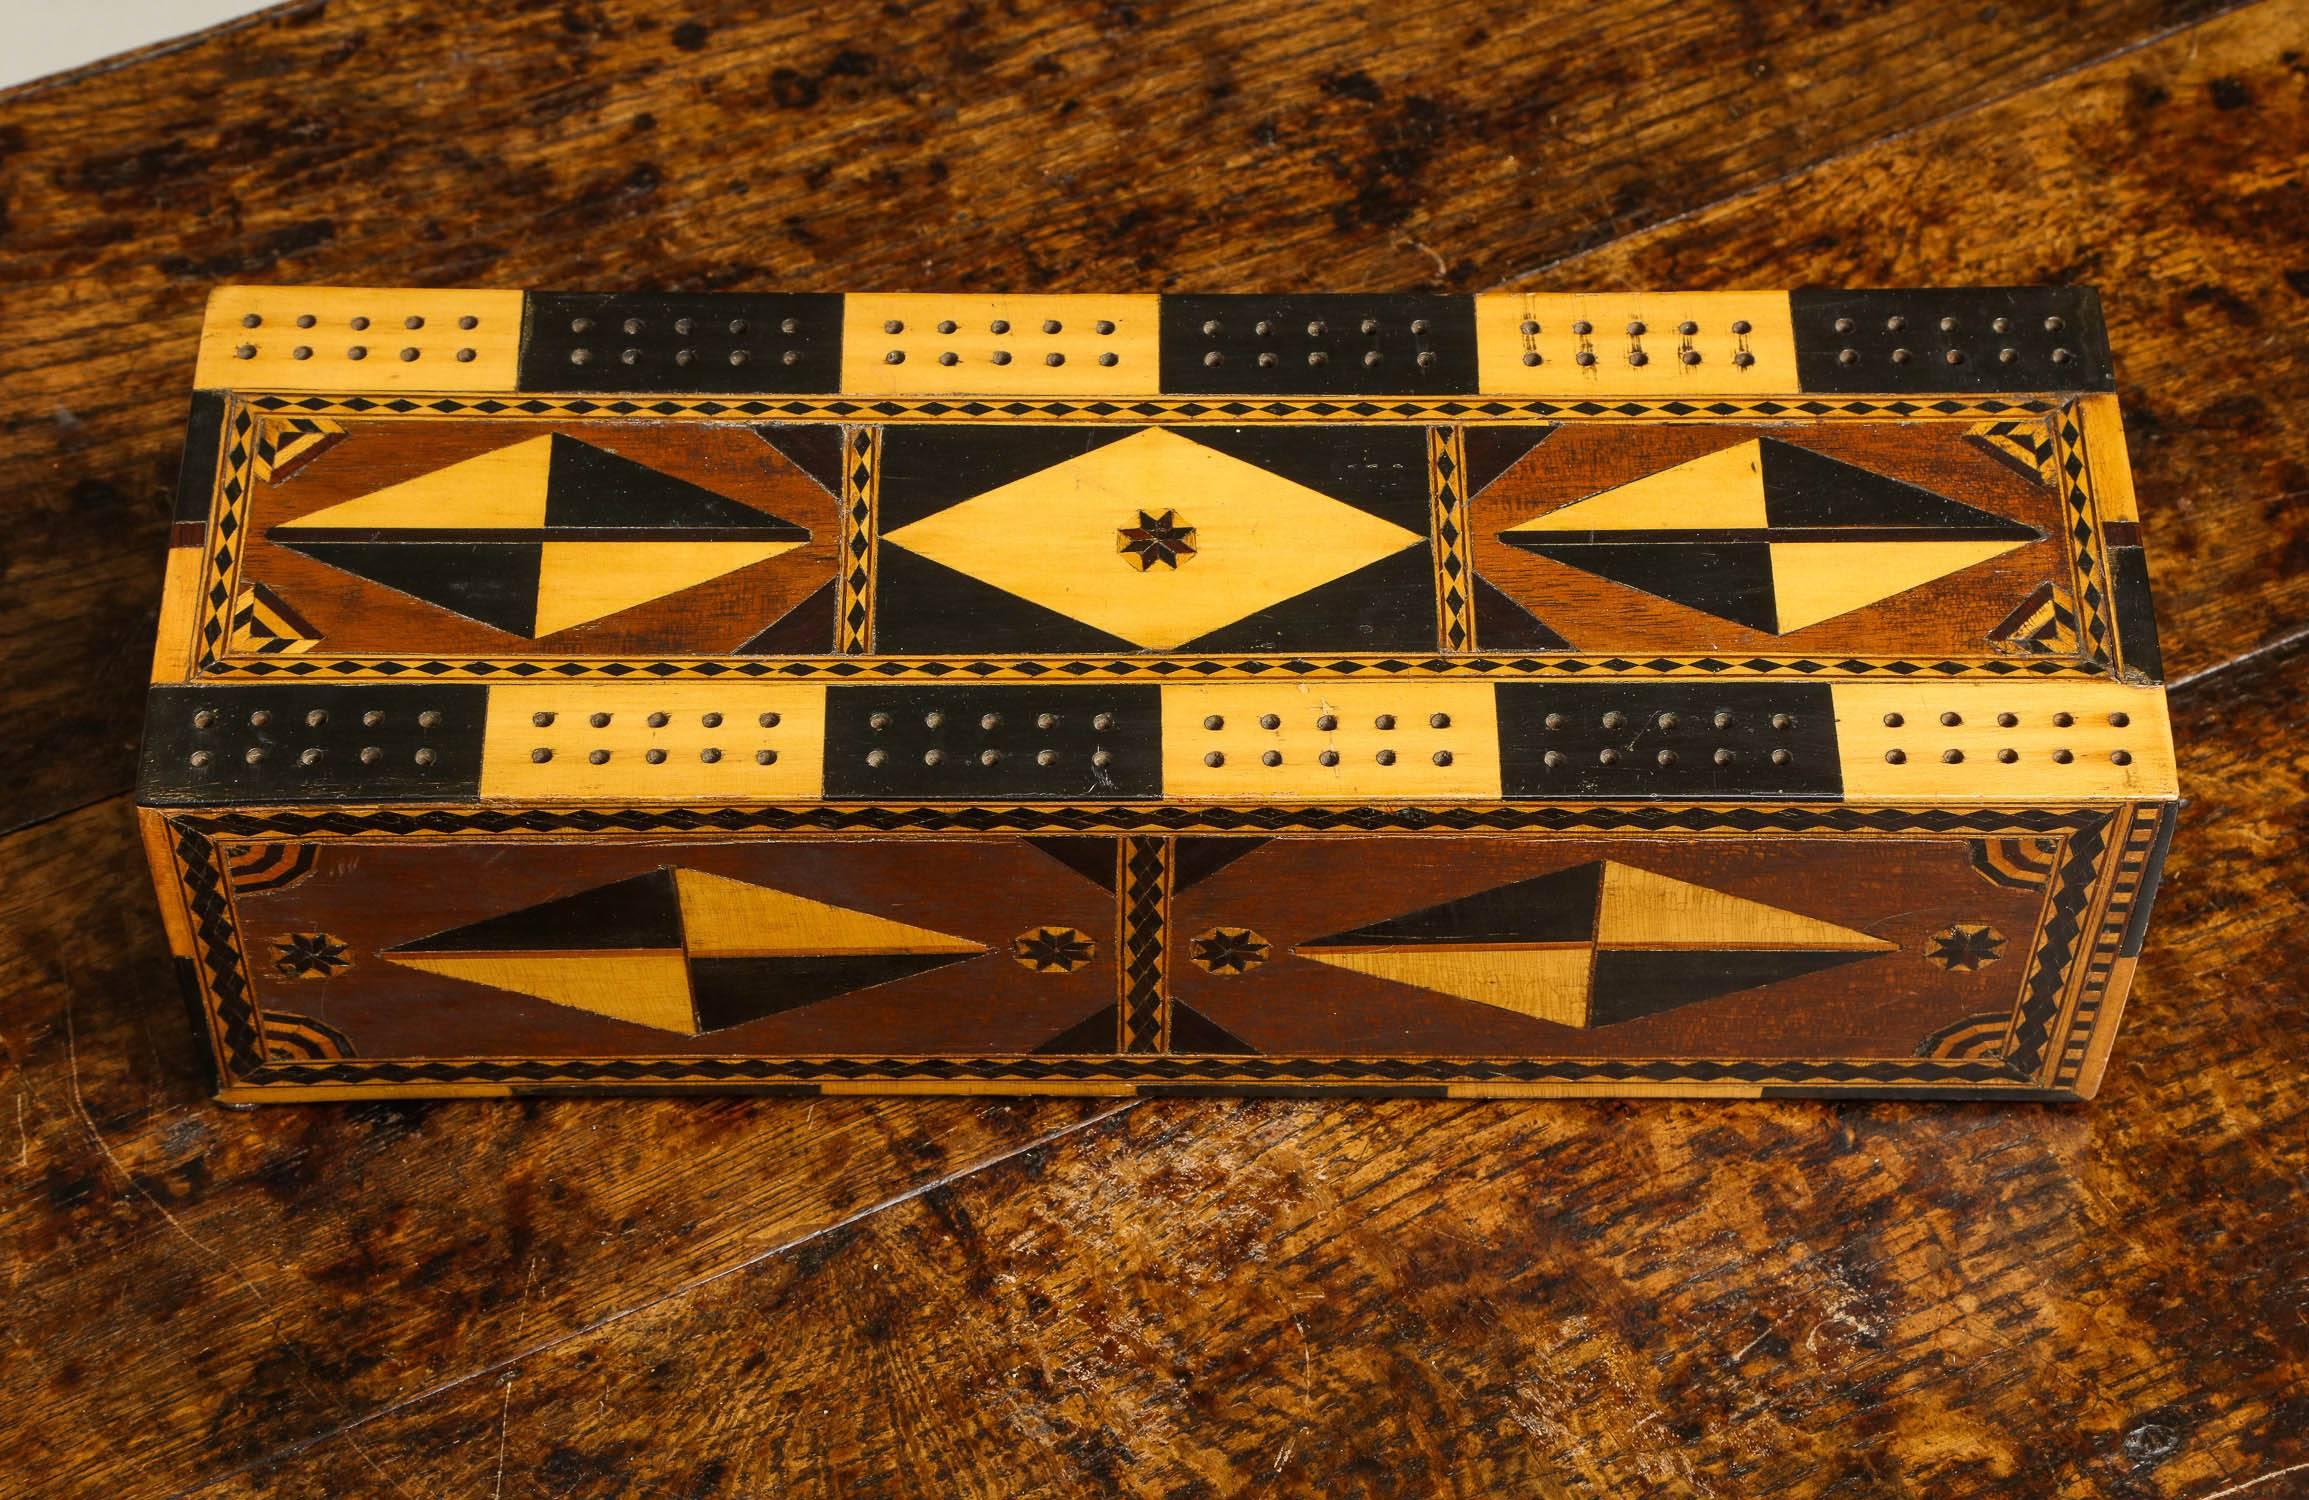 Very fine English mid-19th century cribbage box with striking geometric and contrasting colored inlay, composed of ebony and holly, the body of the box in mahogany, the storage drawer with turned bone handle, original lining paper and in overall